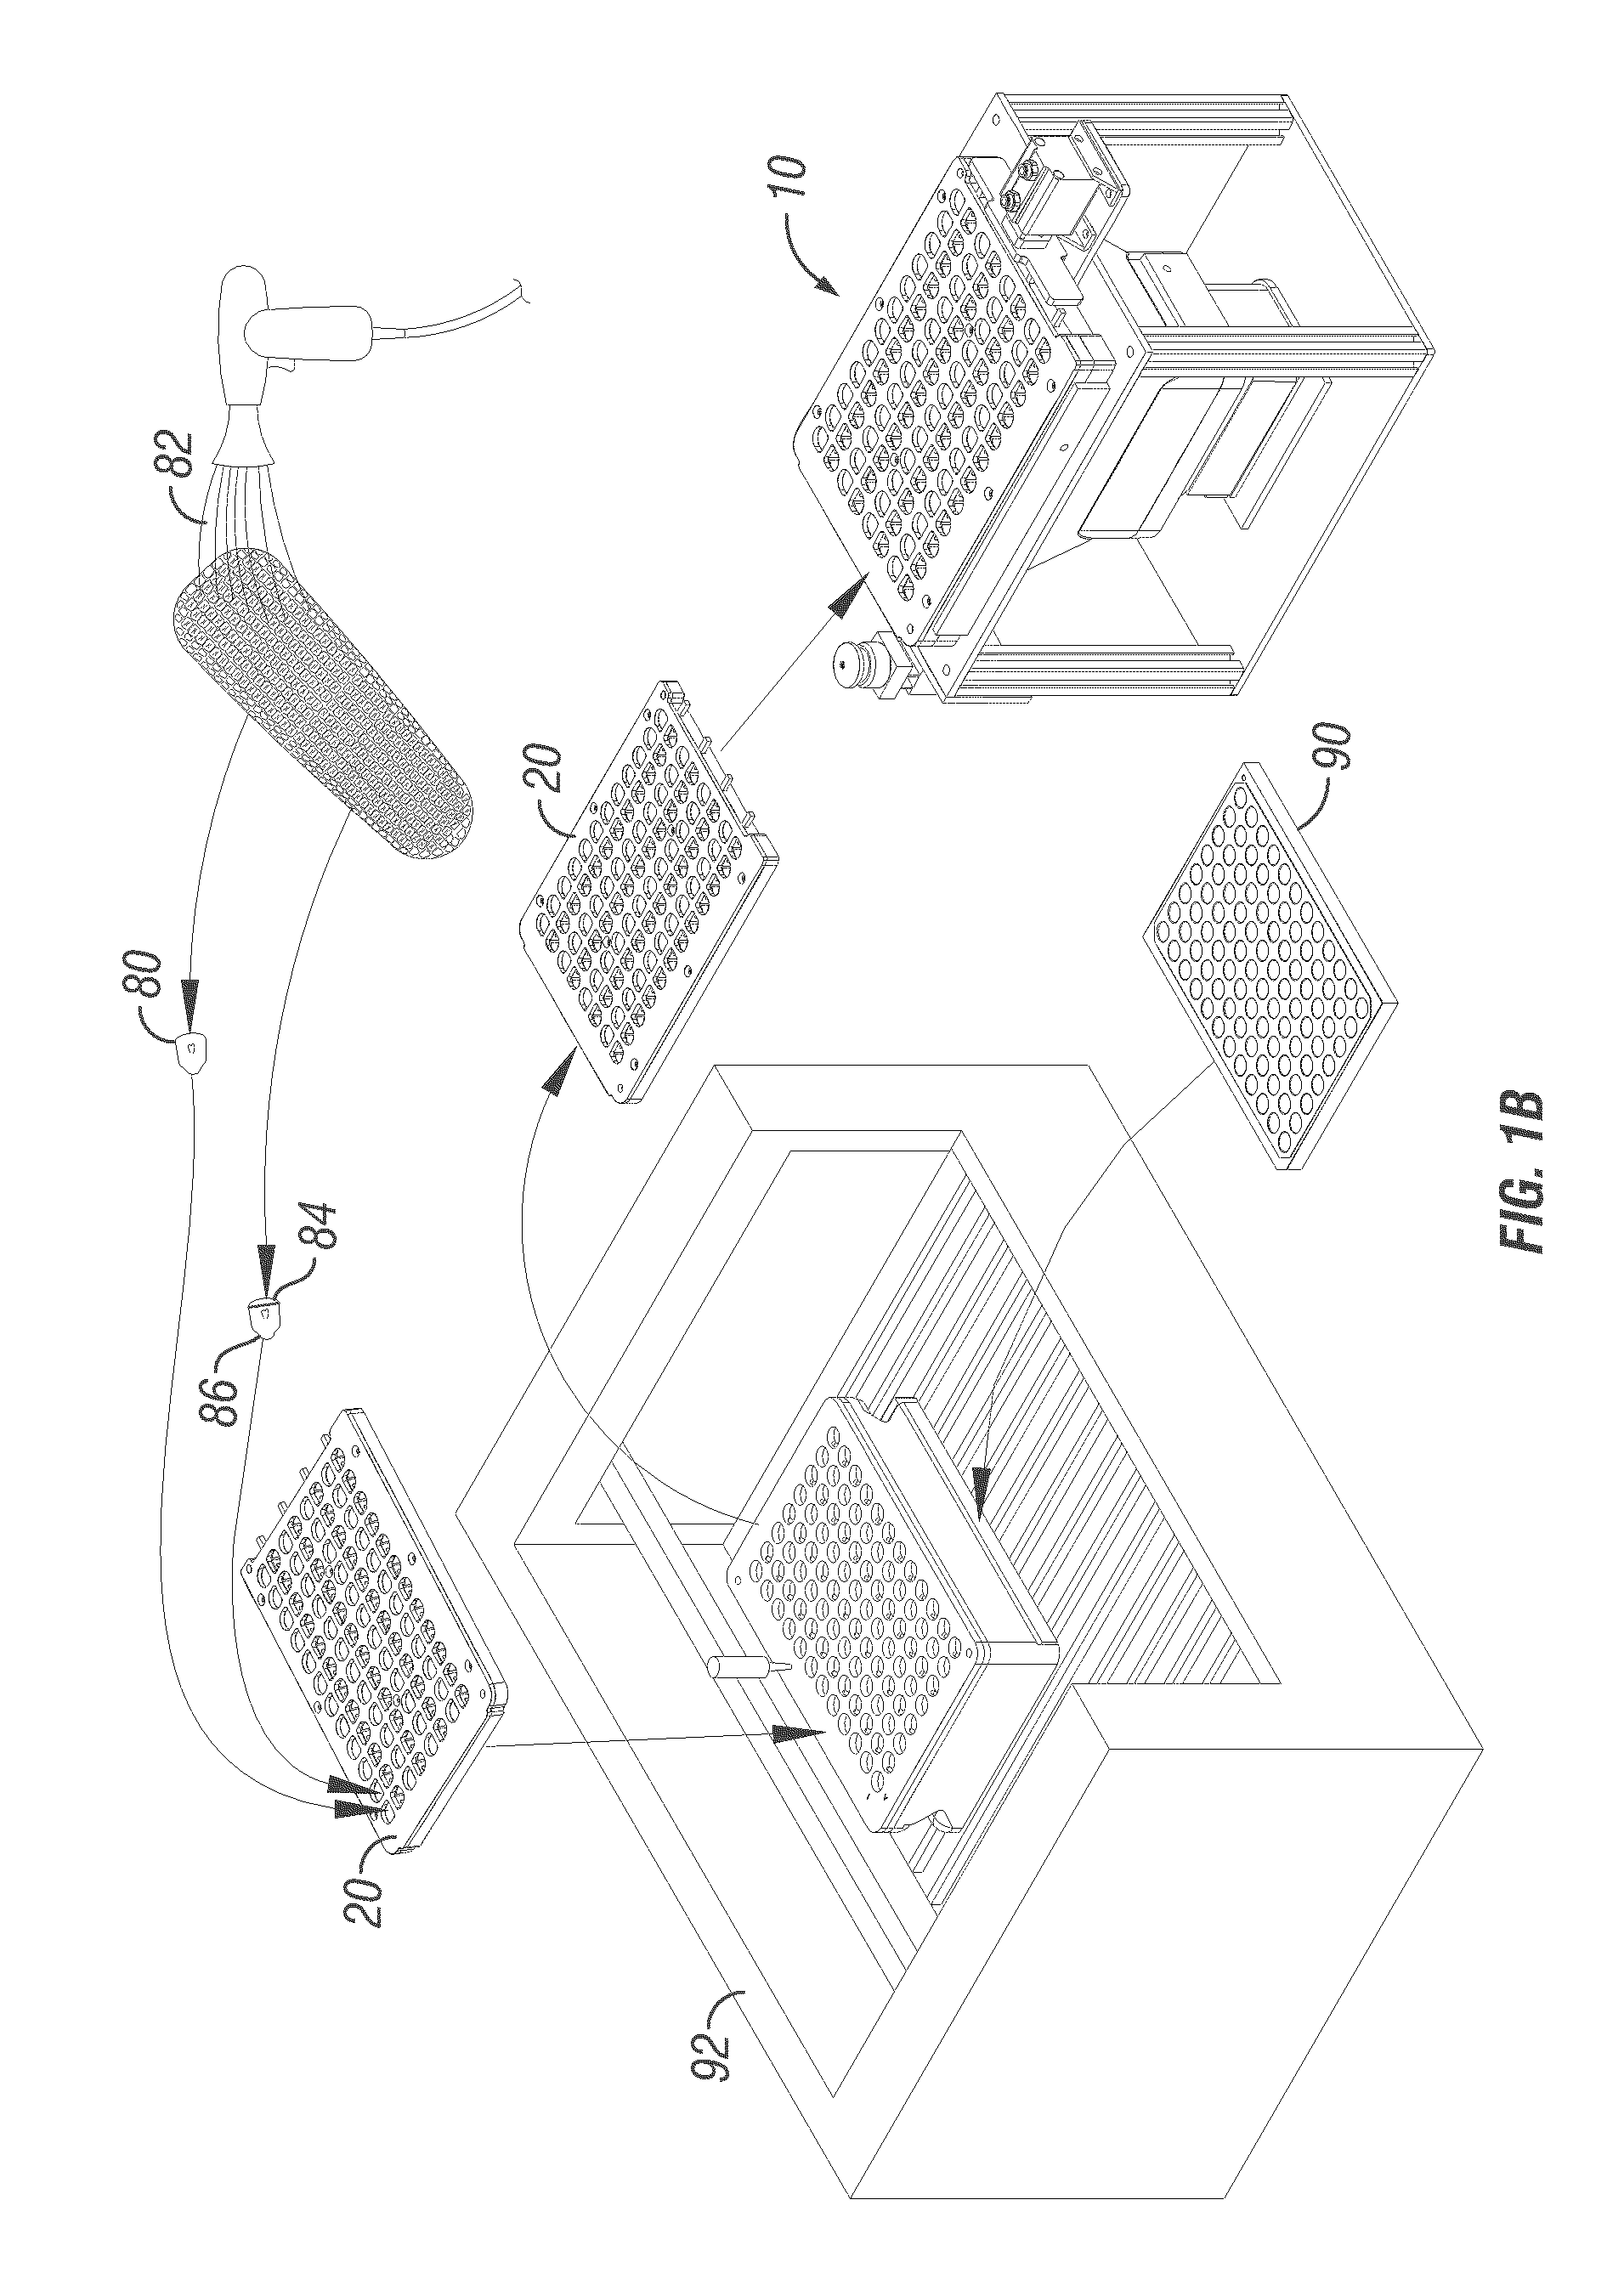 Apparatus, method and system for creating, collecting and indexing seed portions from individual seed